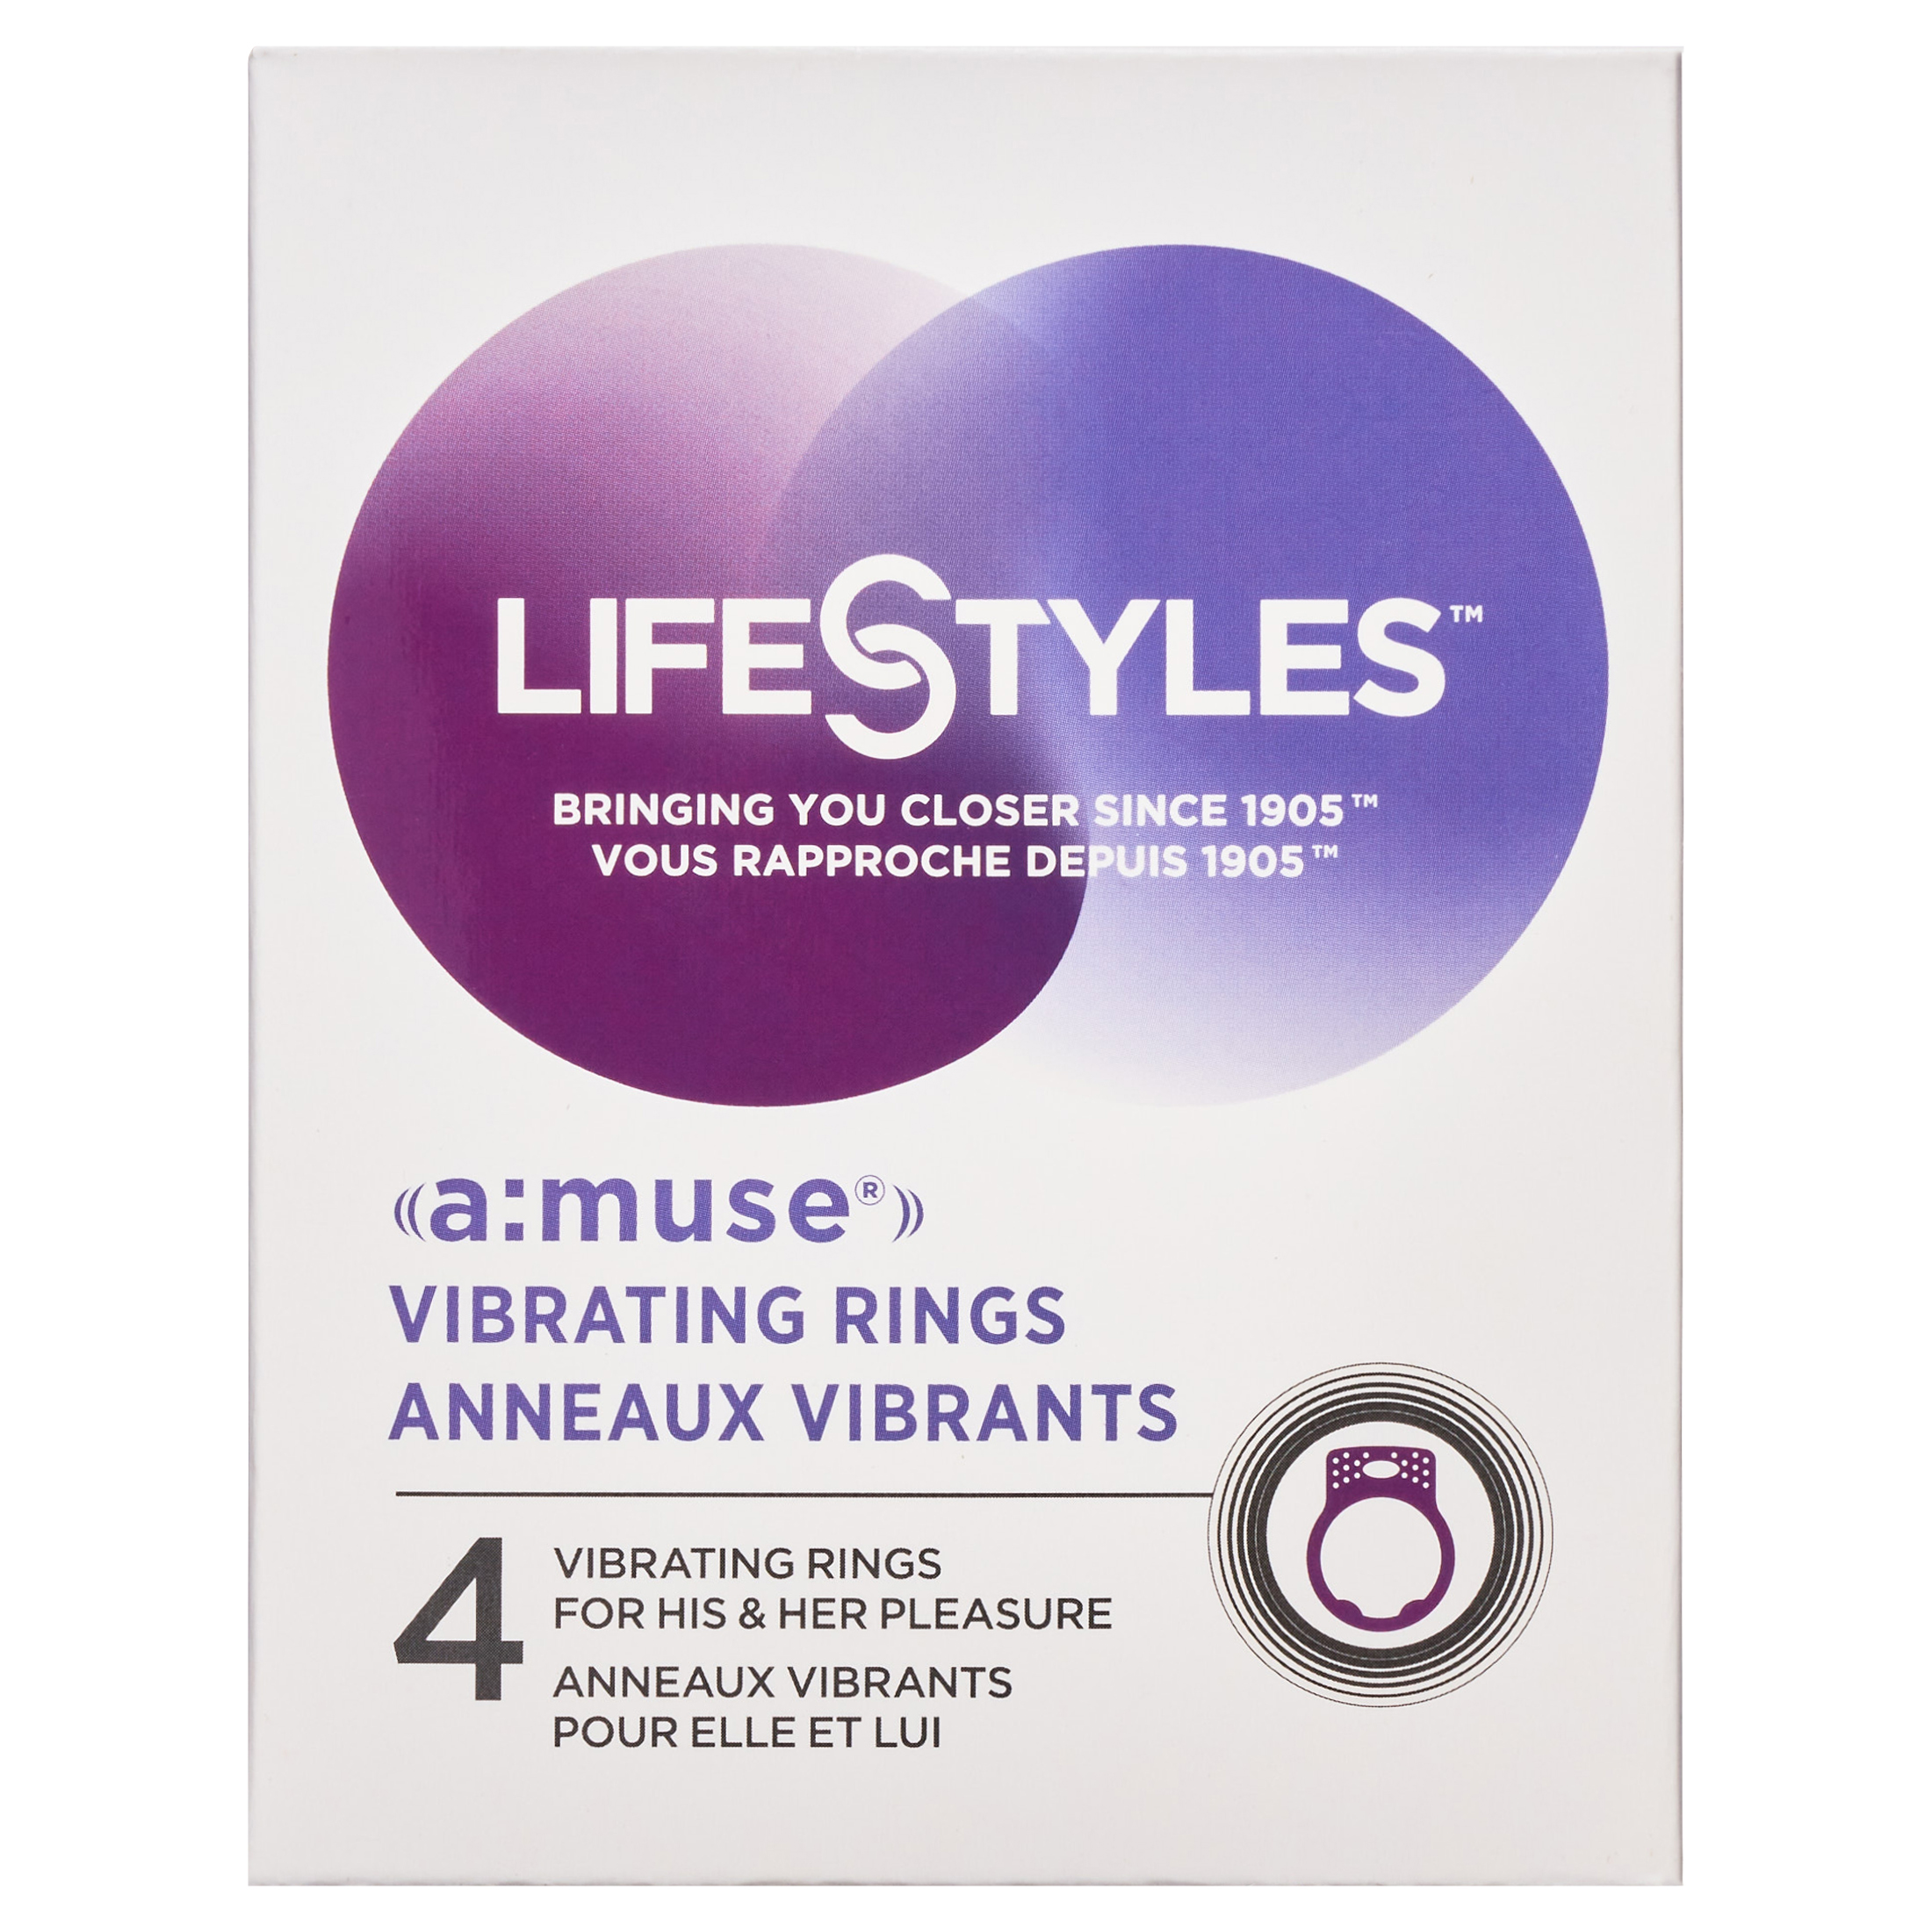 Lifestyles Multi-Pleasure Vibrating Ring Massager, 4 Count - image 1 of 8